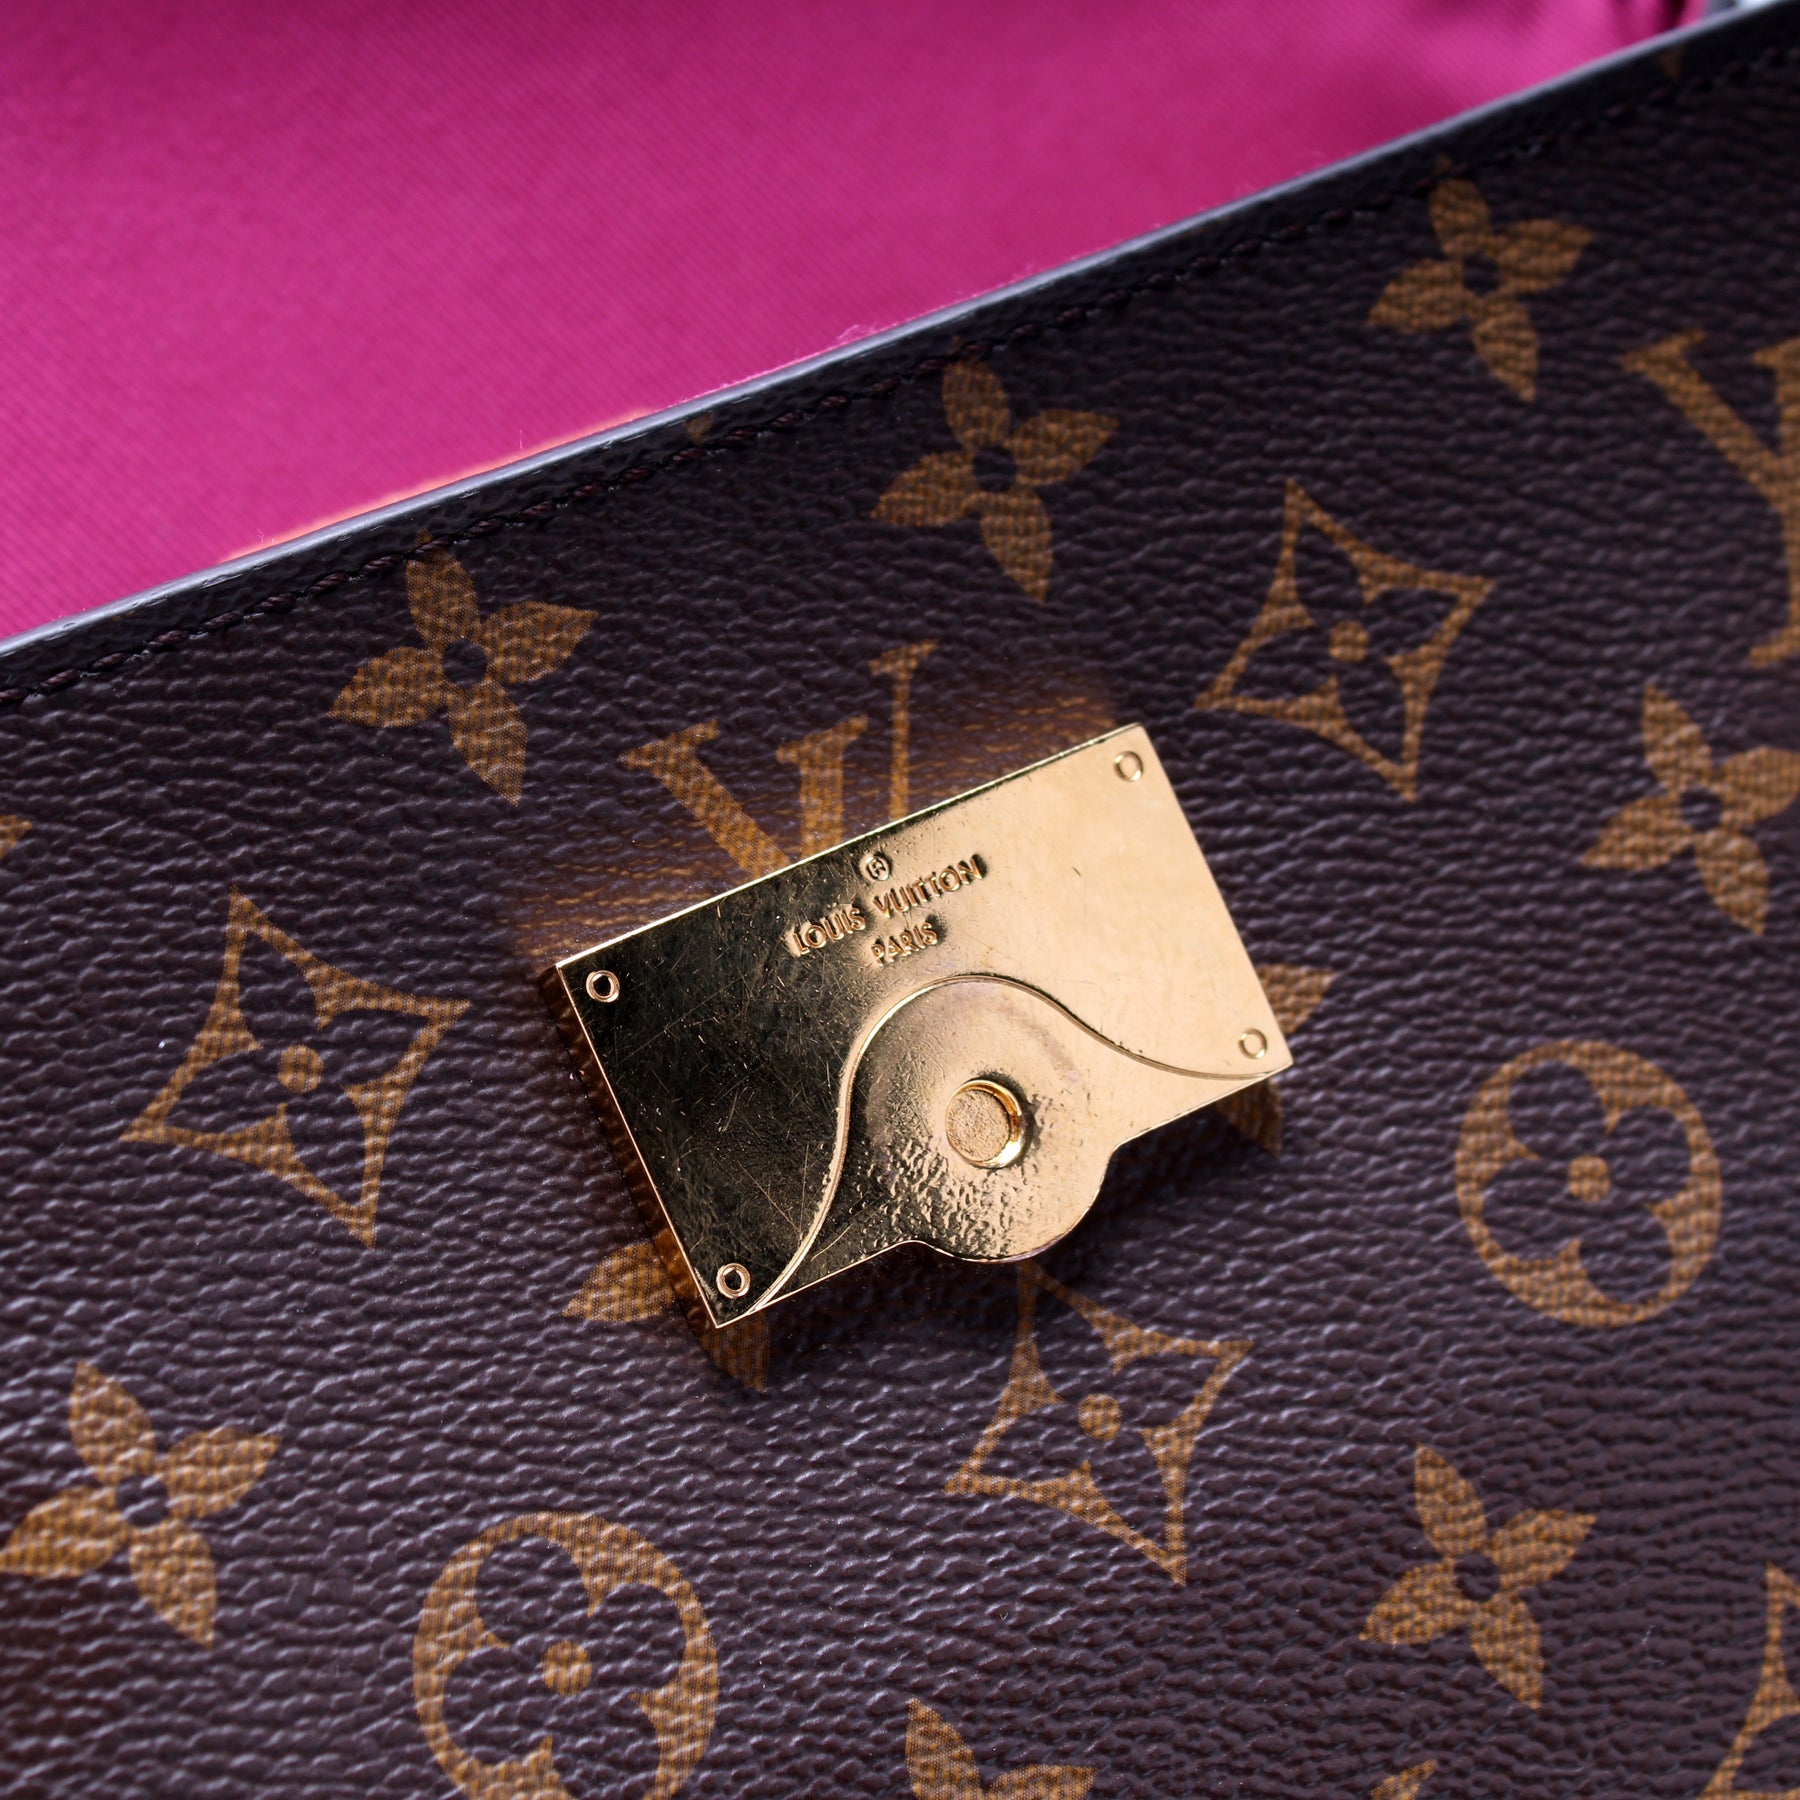 Louis Vuitton cluny BB in monogram – Lady Clara's Collection